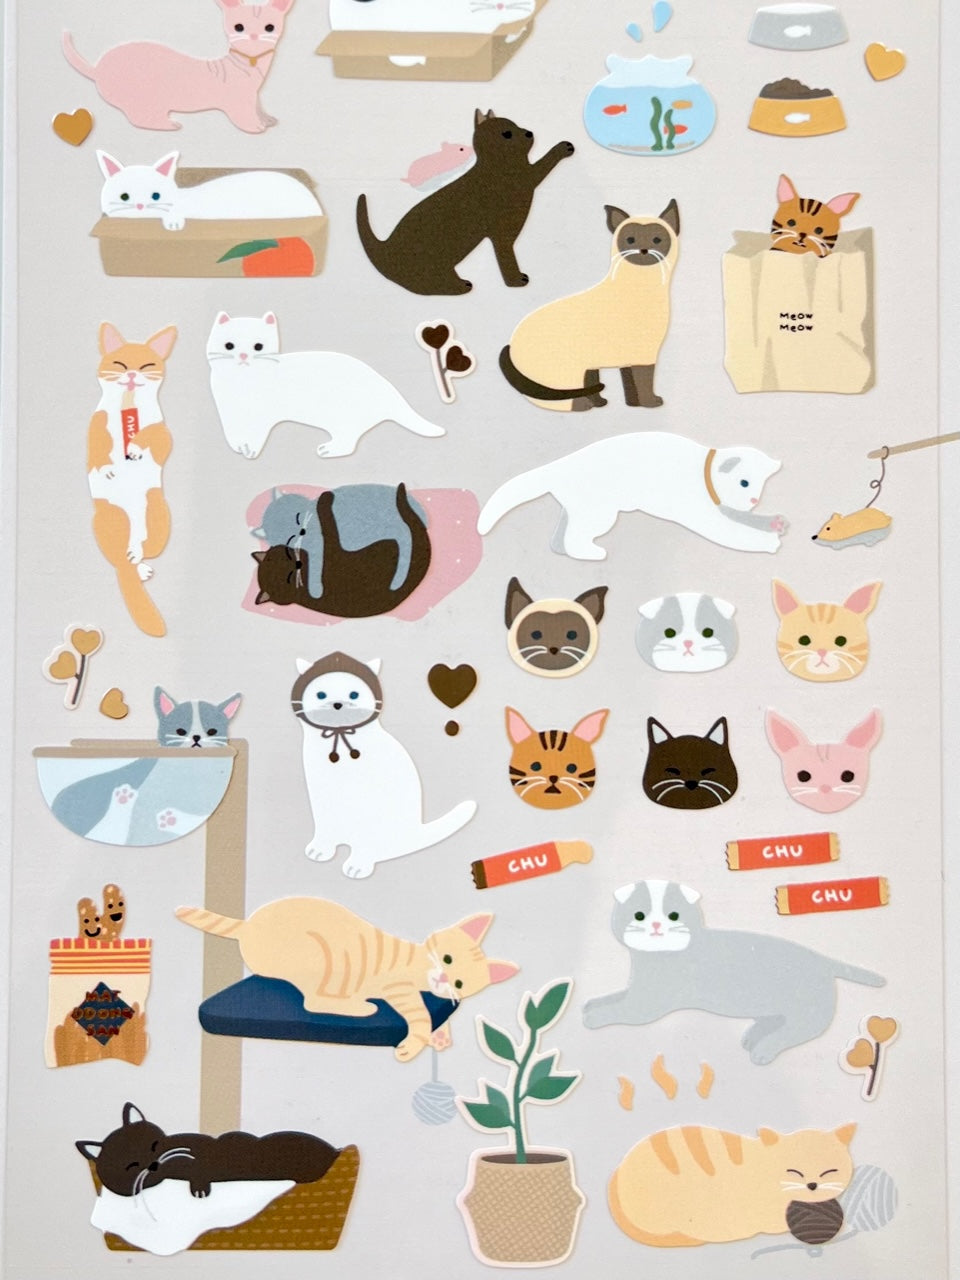 01093 MEOW STICKERS-12